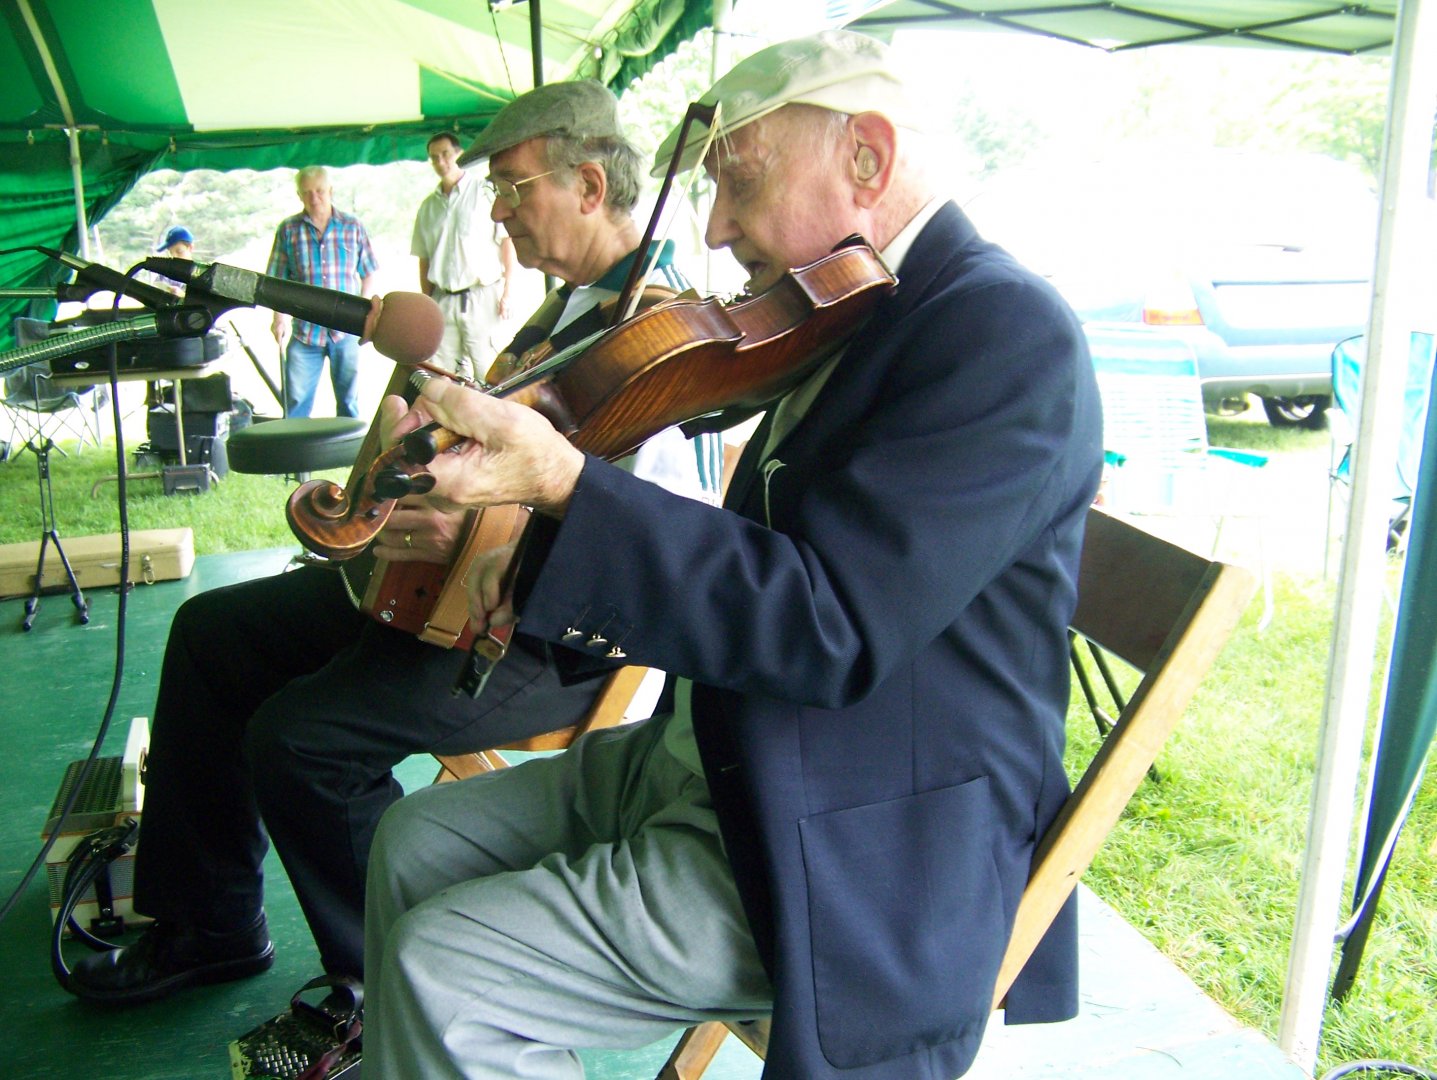 Marty O'Keefe playing fiddle and Ted McGraw playing accordion at GCV Fiddlers festival